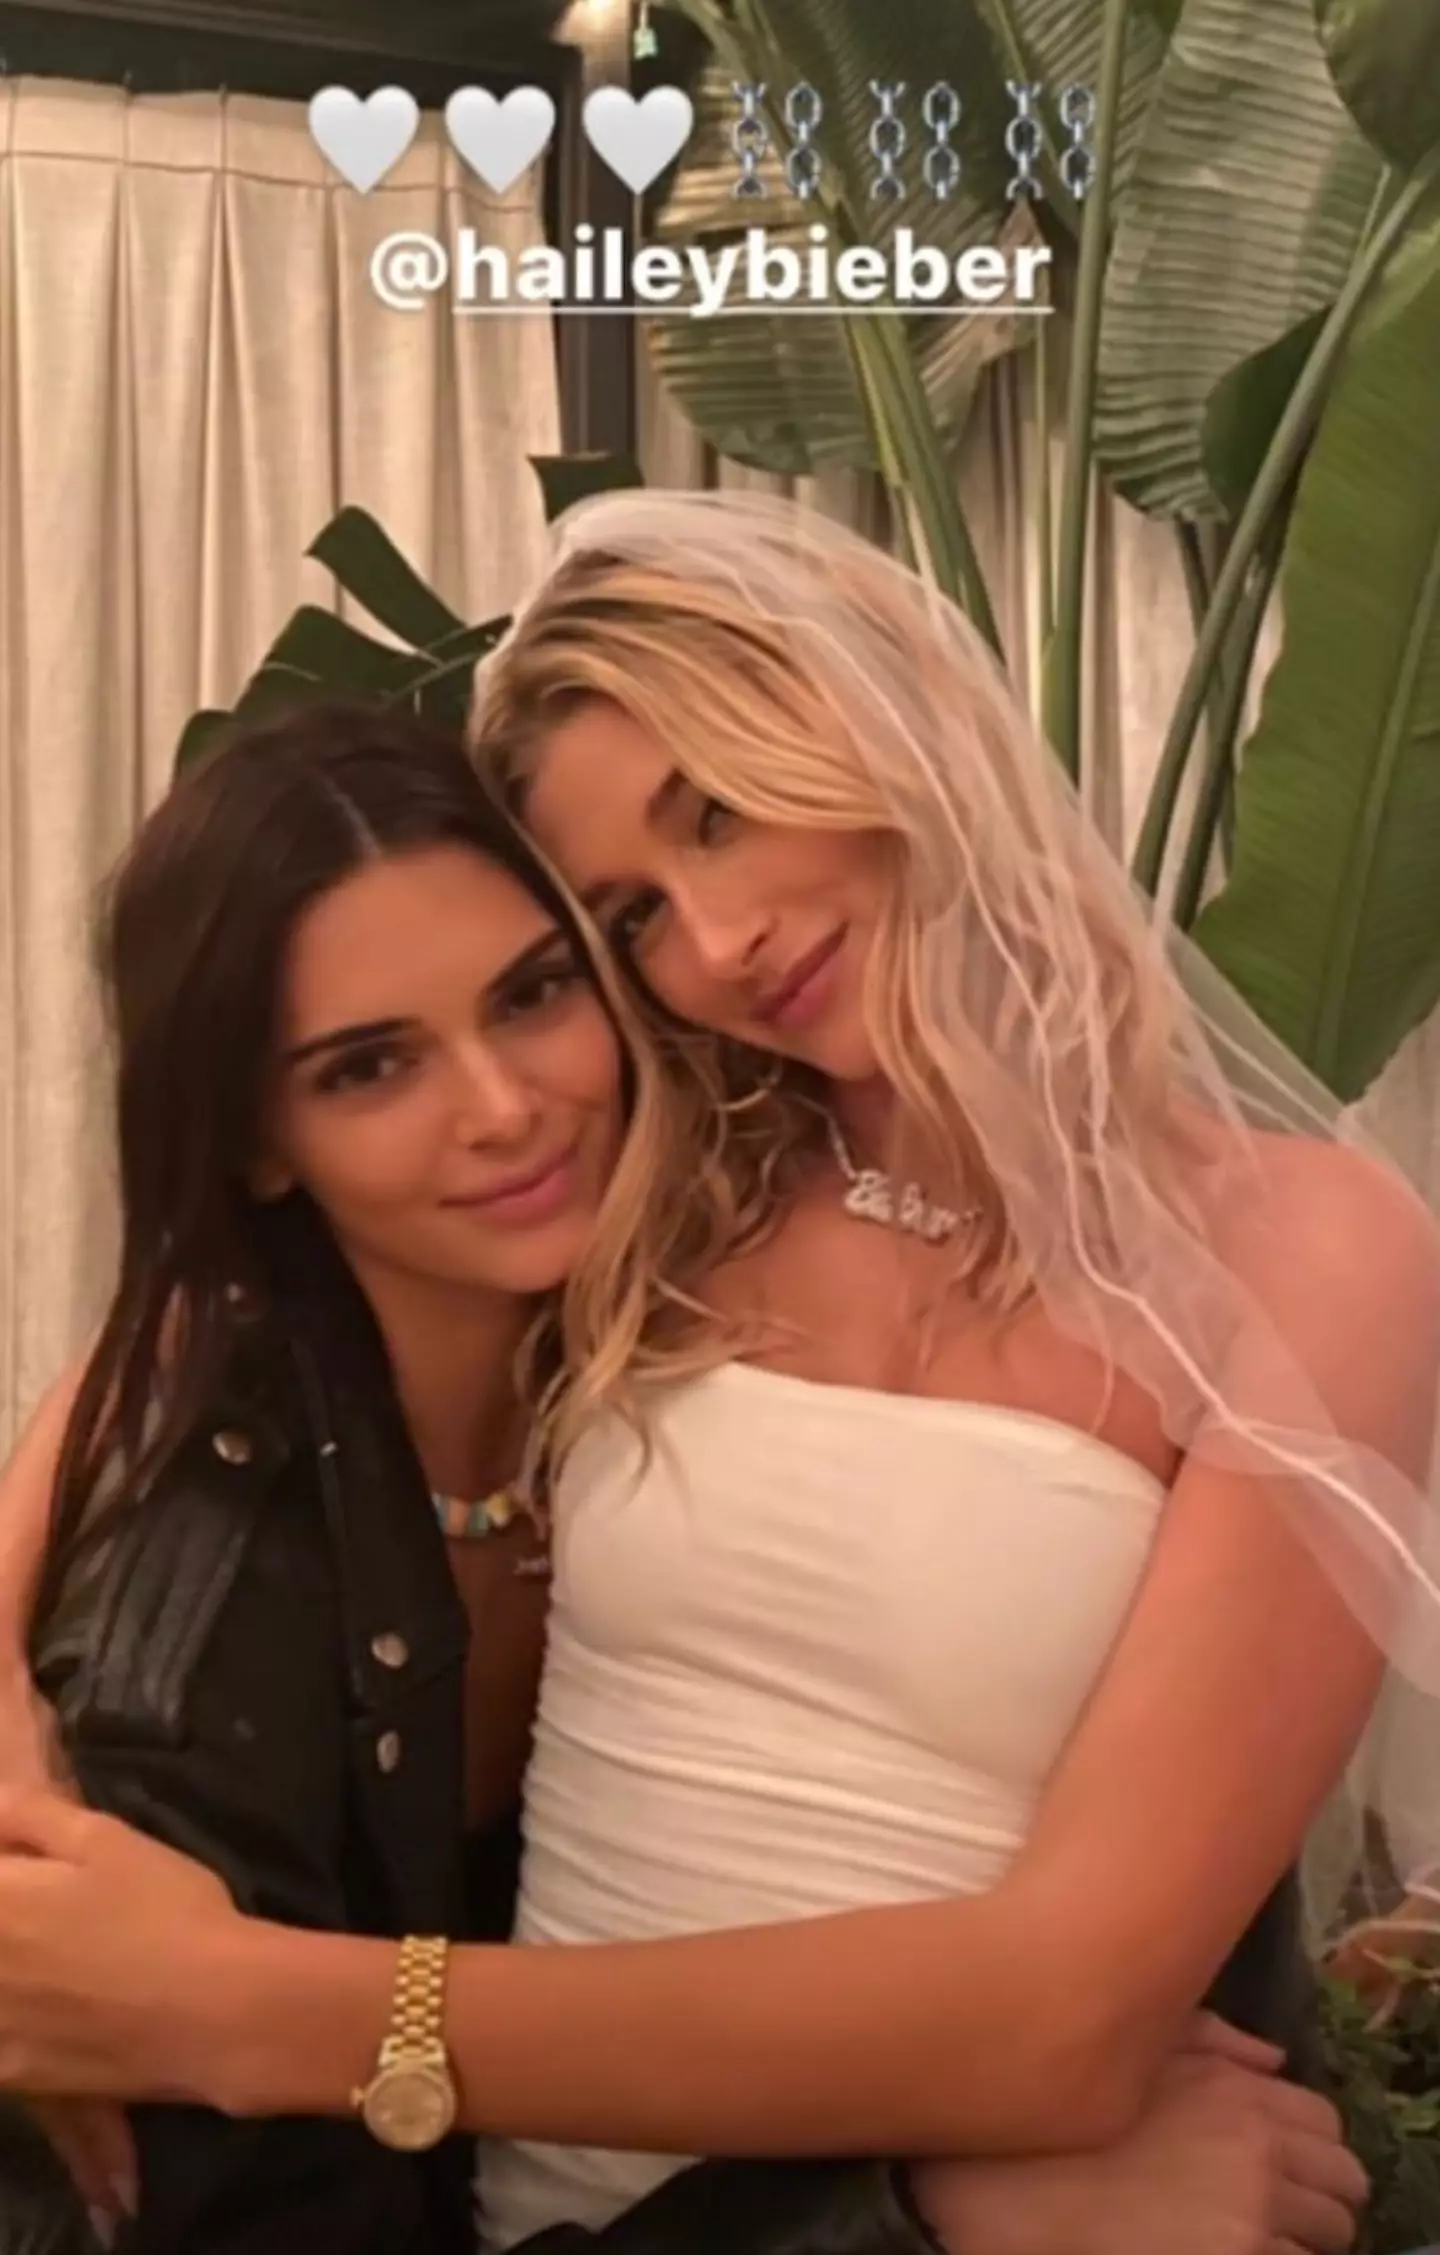 Kendall Jenner and Hailey Bieber have been pals for years.